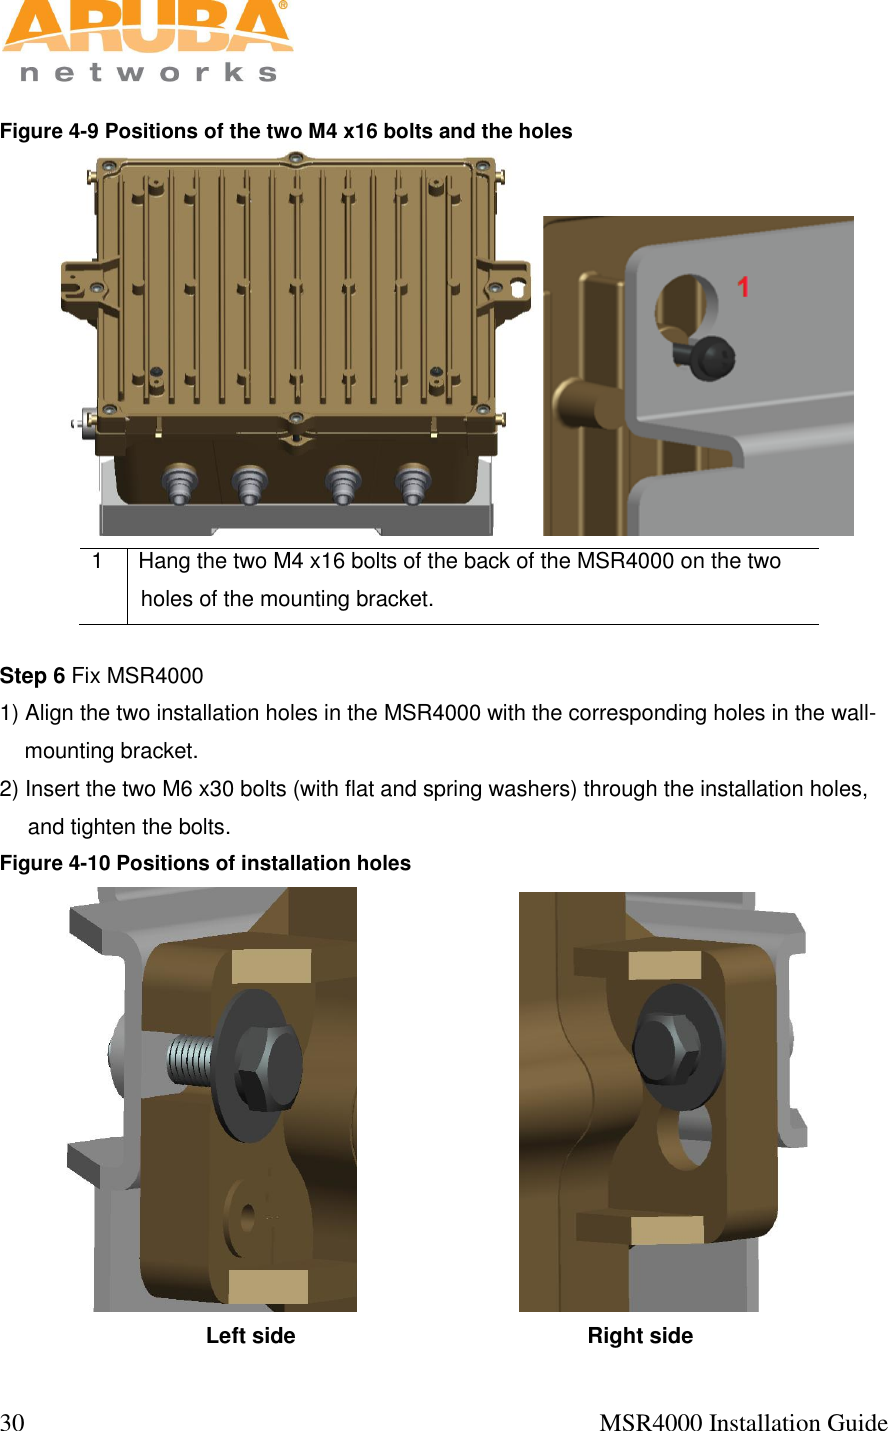  30                                                                                            MSR4000 Installation Guide    Figure 4-9 Positions of the two M4 x16 bolts and the holes   1 Hang the two M4 x16 bolts of the back of the MSR4000 on the two holes of the mounting bracket.  Step 6 Fix MSR4000 1) Align the two installation holes in the MSR4000 with the corresponding holes in the wall-mounting bracket.  2) Insert the two M6 x30 bolts (with flat and spring washers) through the installation holes, and tighten the bolts.   Figure 4-10 Positions of installation holes                             Left side                                                Right side 